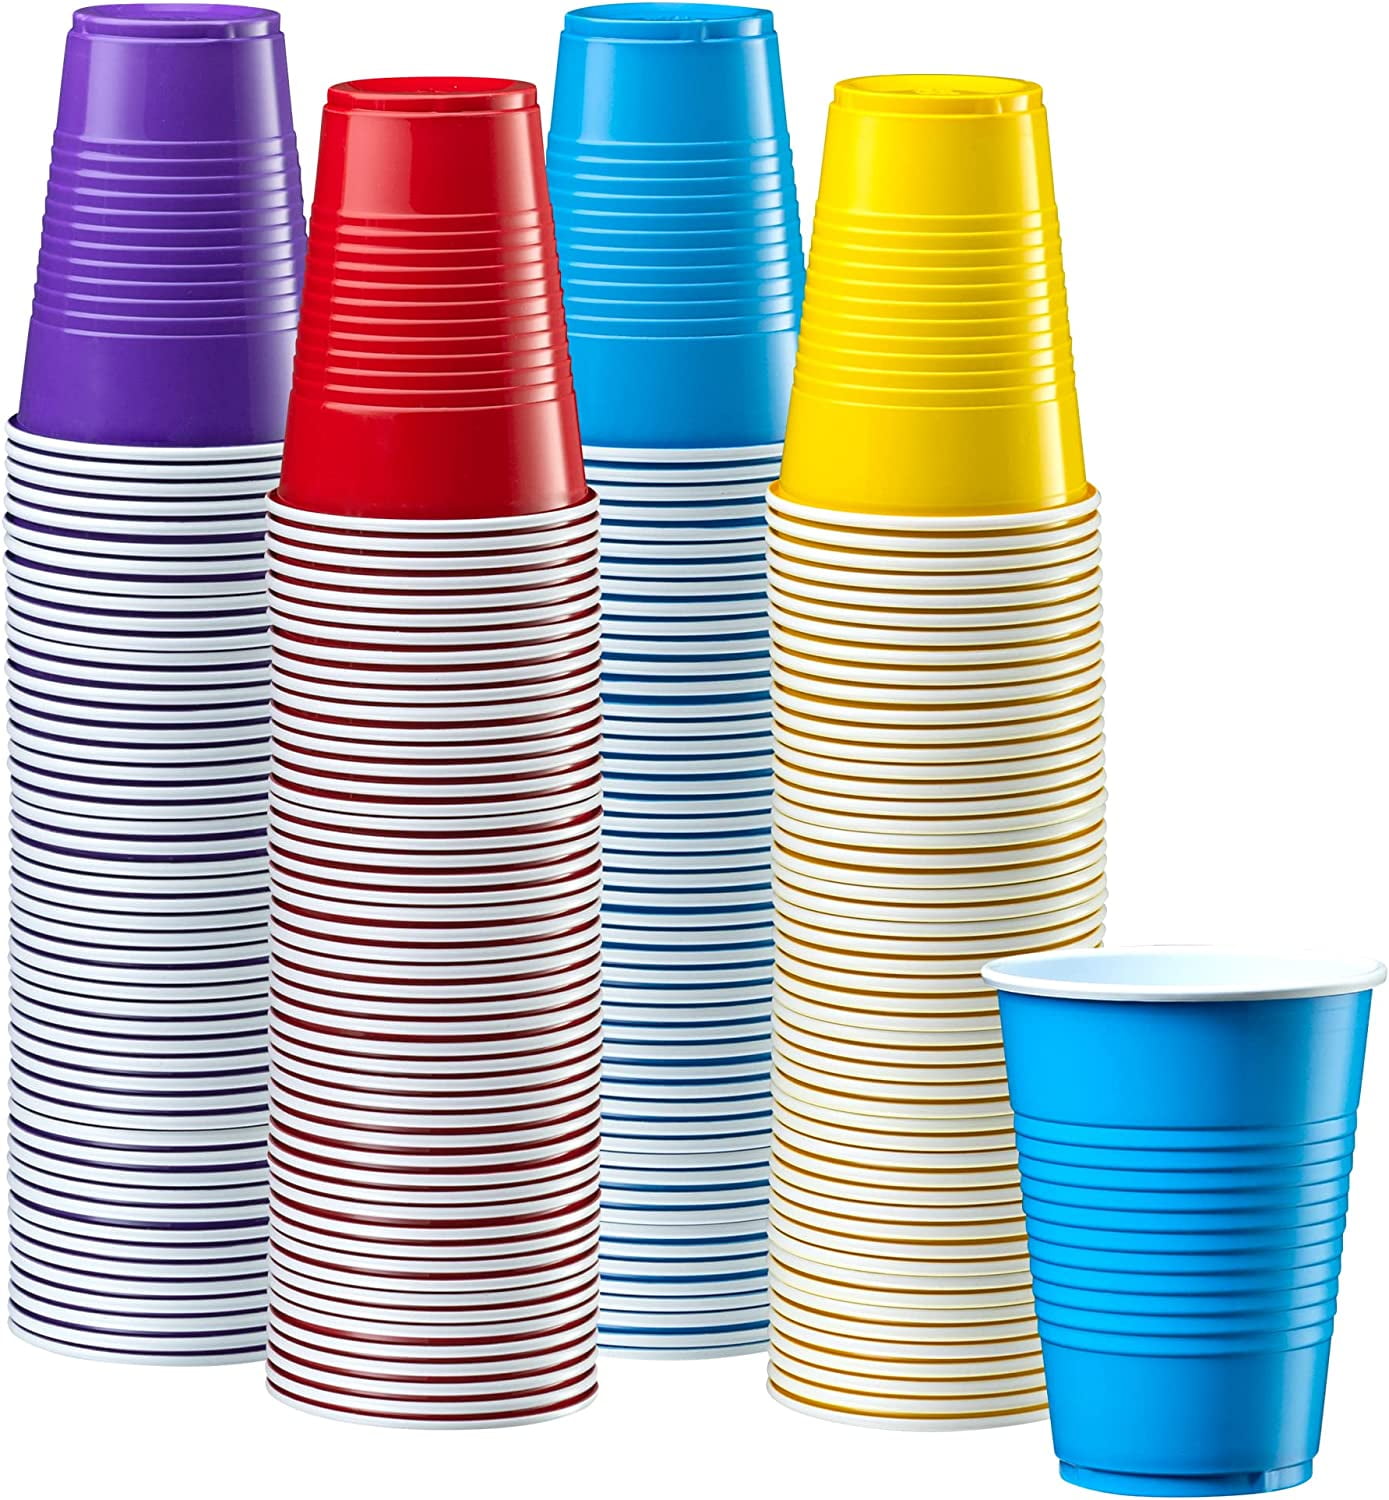 9pc Colourful Plastic Cups Reusable Eco-Friendly Drinking Cup Stackable  Water Coffee Juice Beverage Mugs Picnic Travel Drinkware - AliExpress